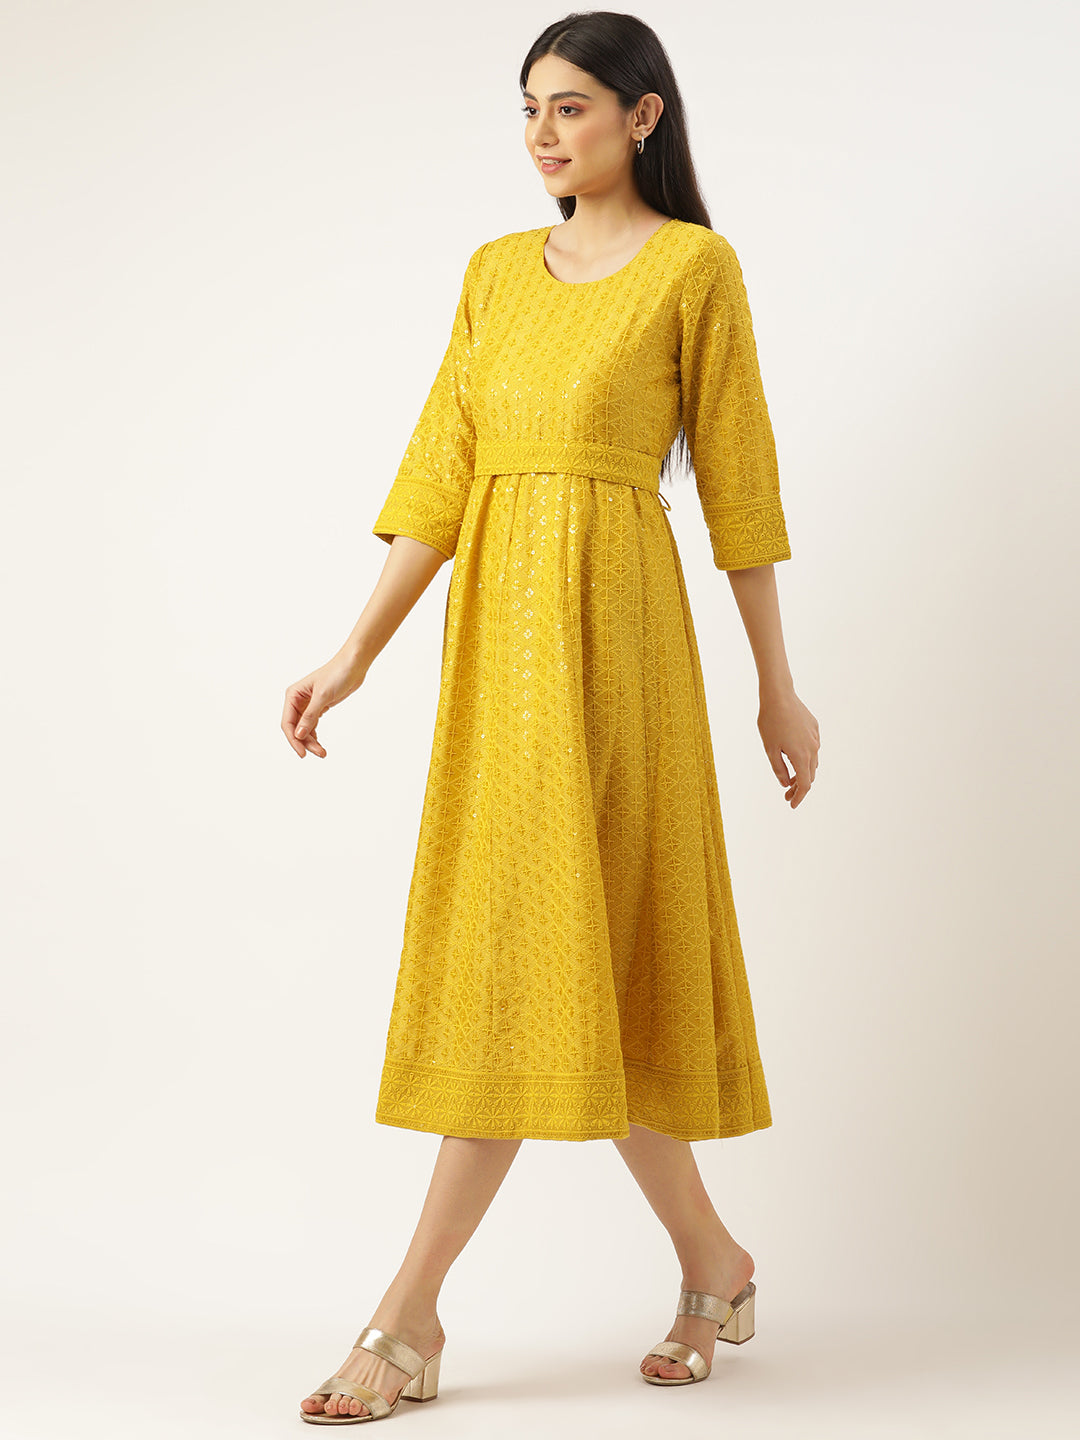 MUSTARD POLYESTER EMBROIDERED GOWN WITH BELT